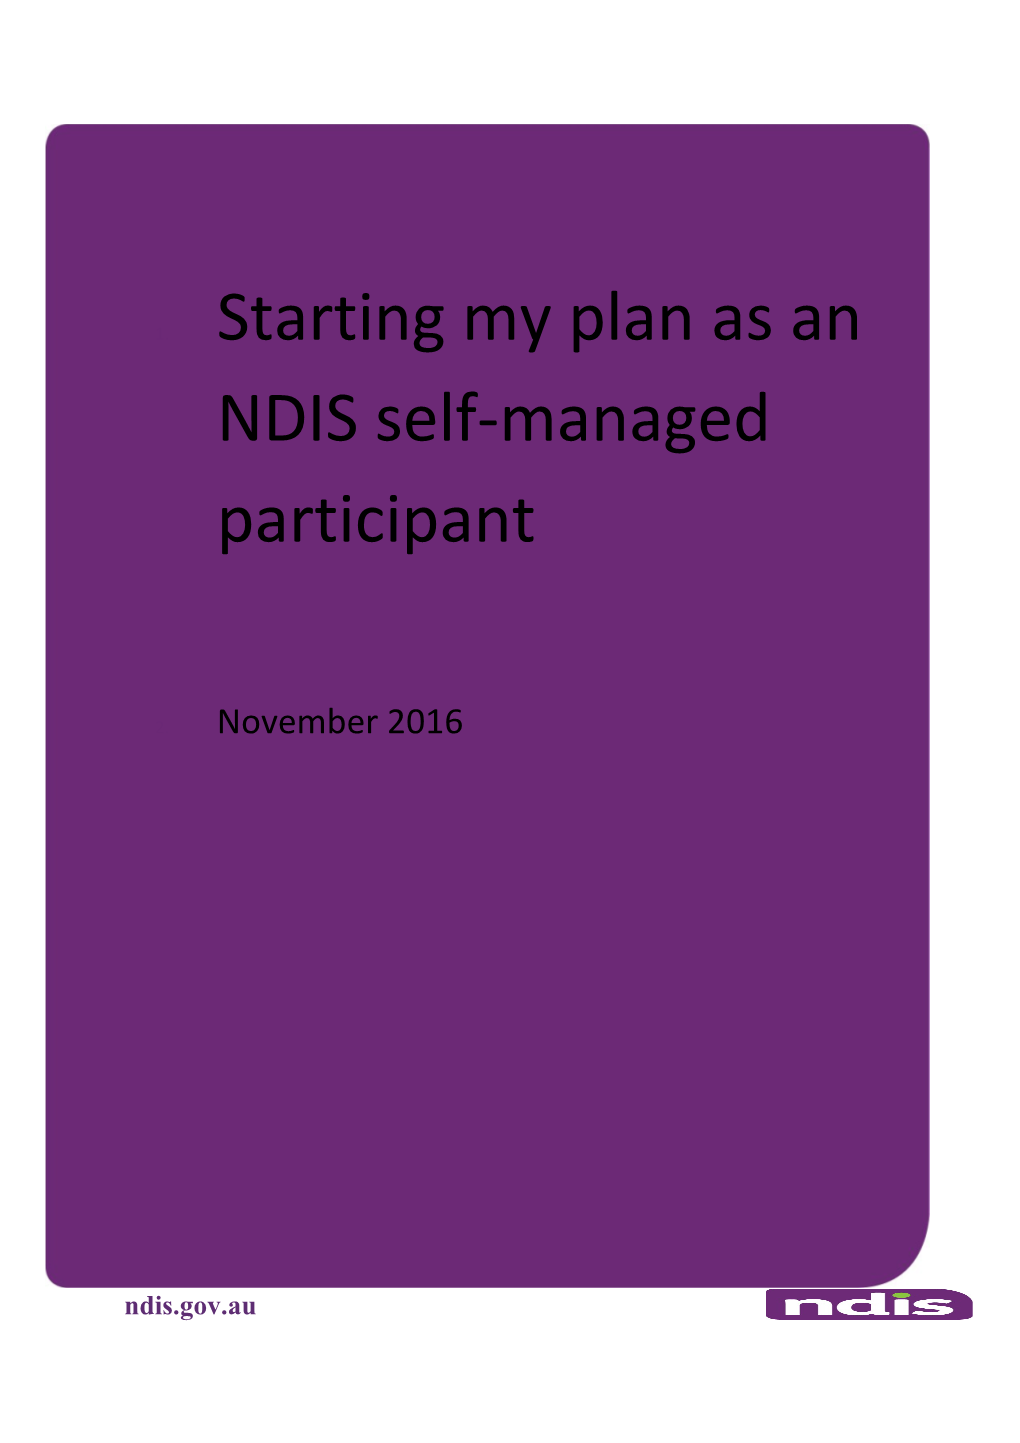 Starting My Plan As an NDIS Self-Managed Participant